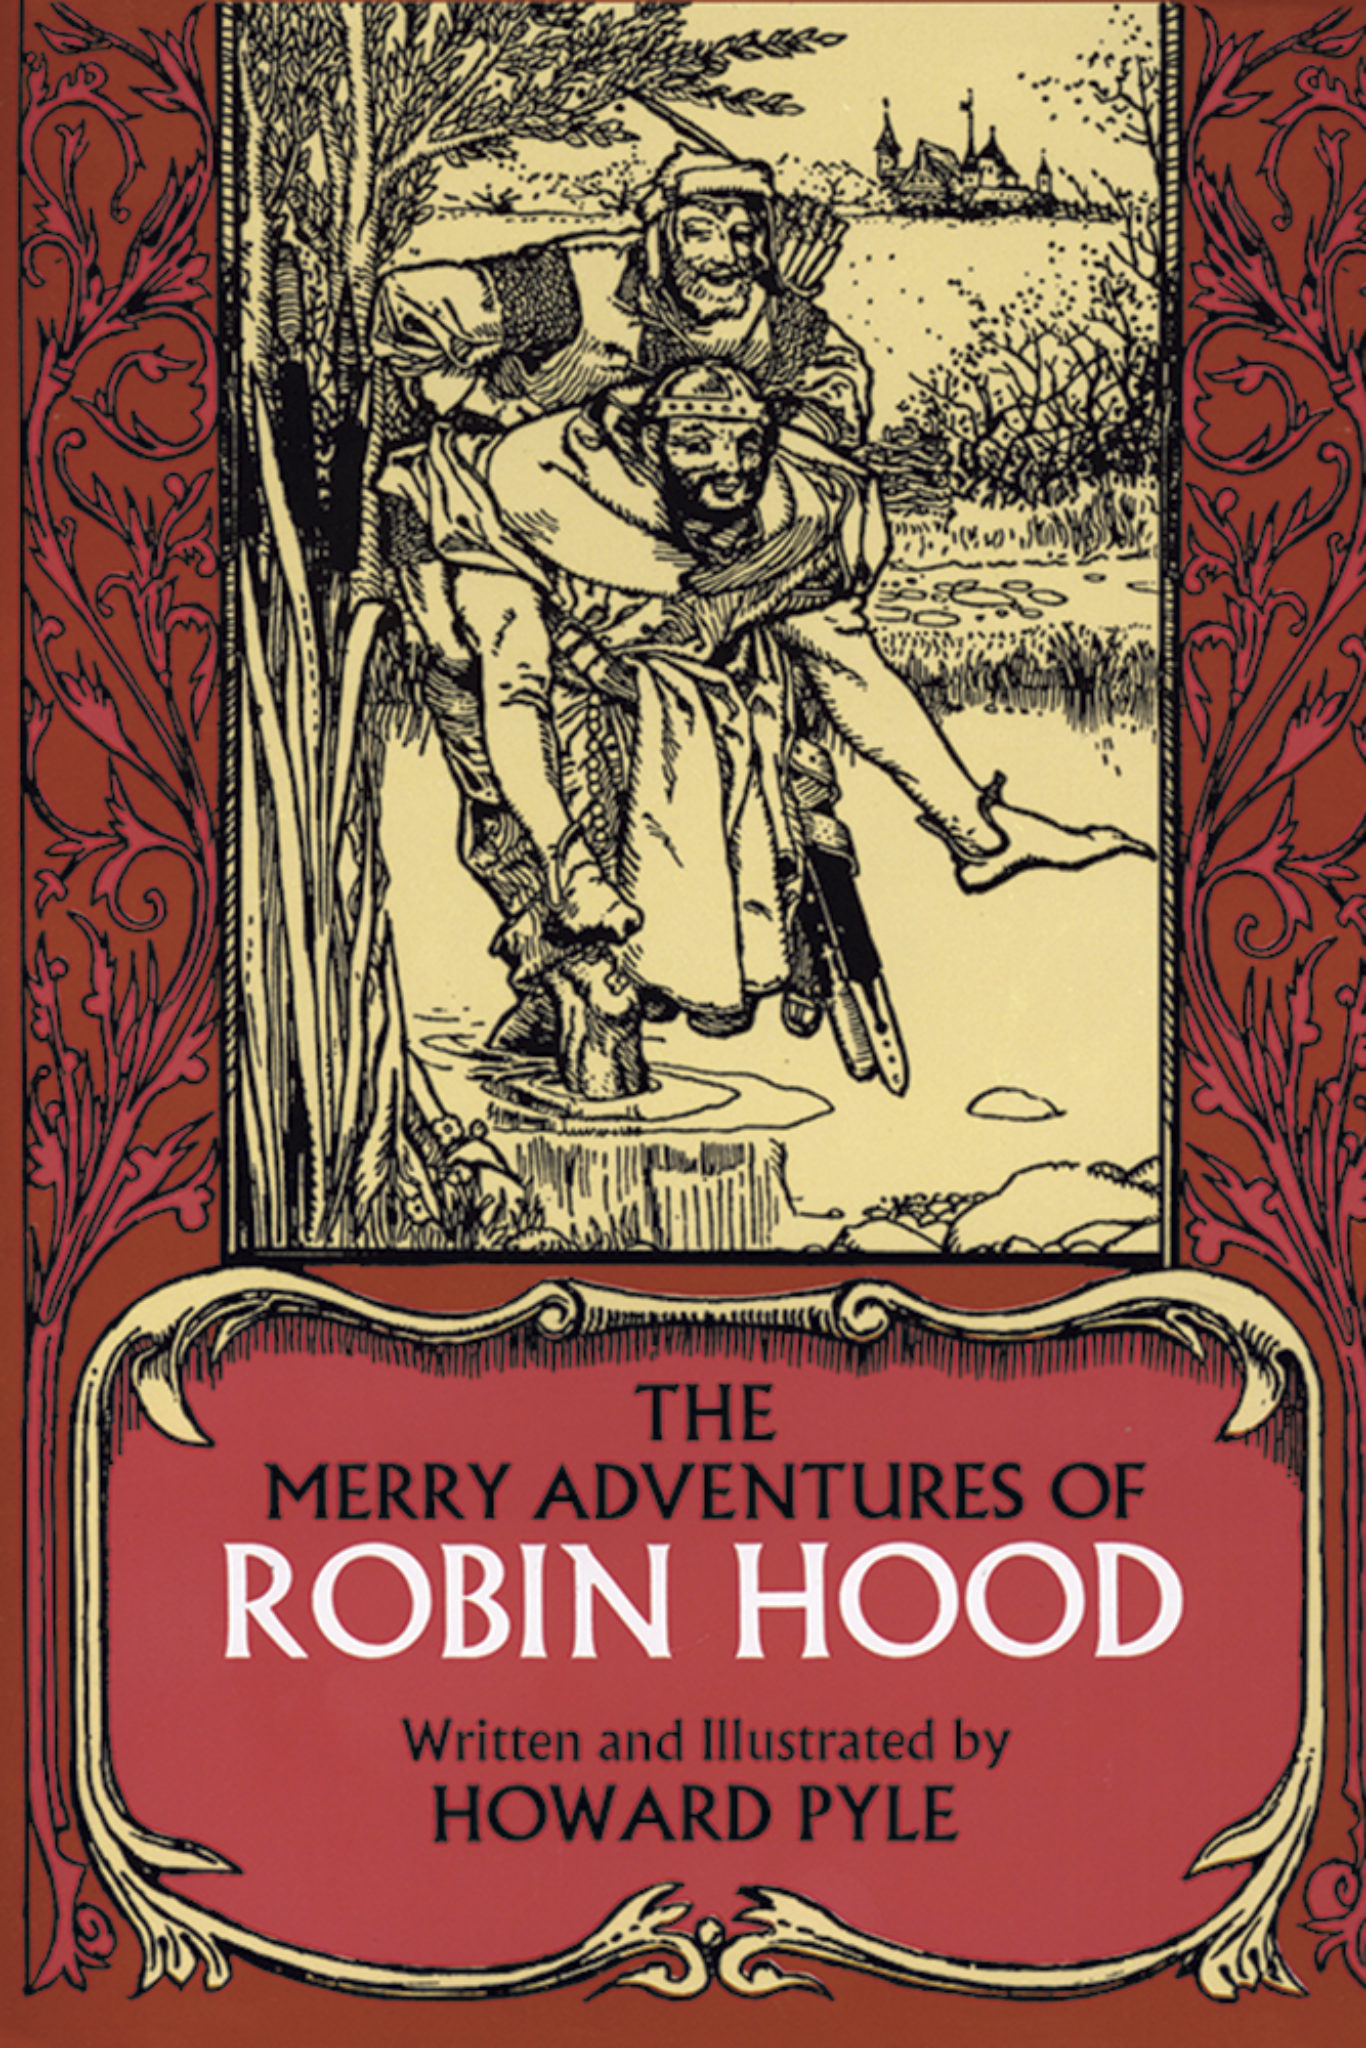 book review of the merry adventures of robin hood